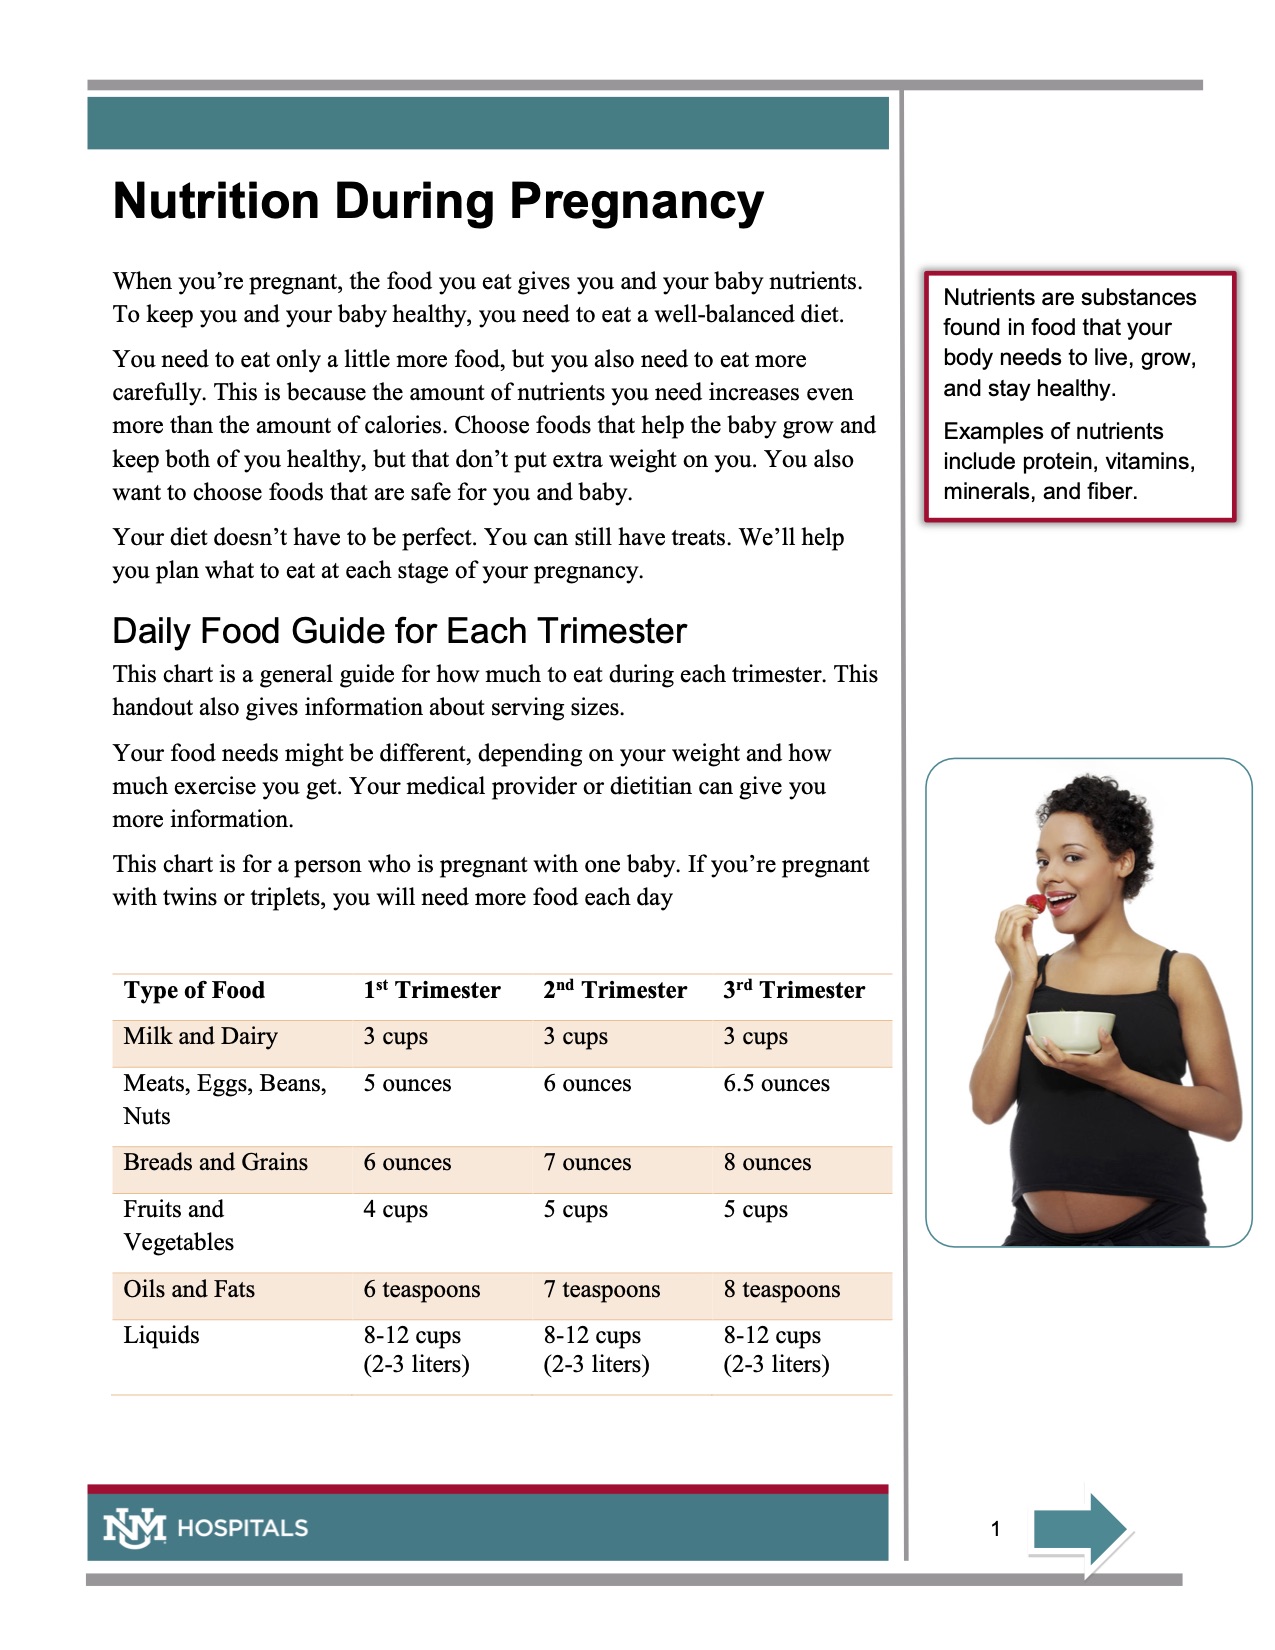 Nutrition-During-Pregnancy-_4-8_22_ENG_812-2032